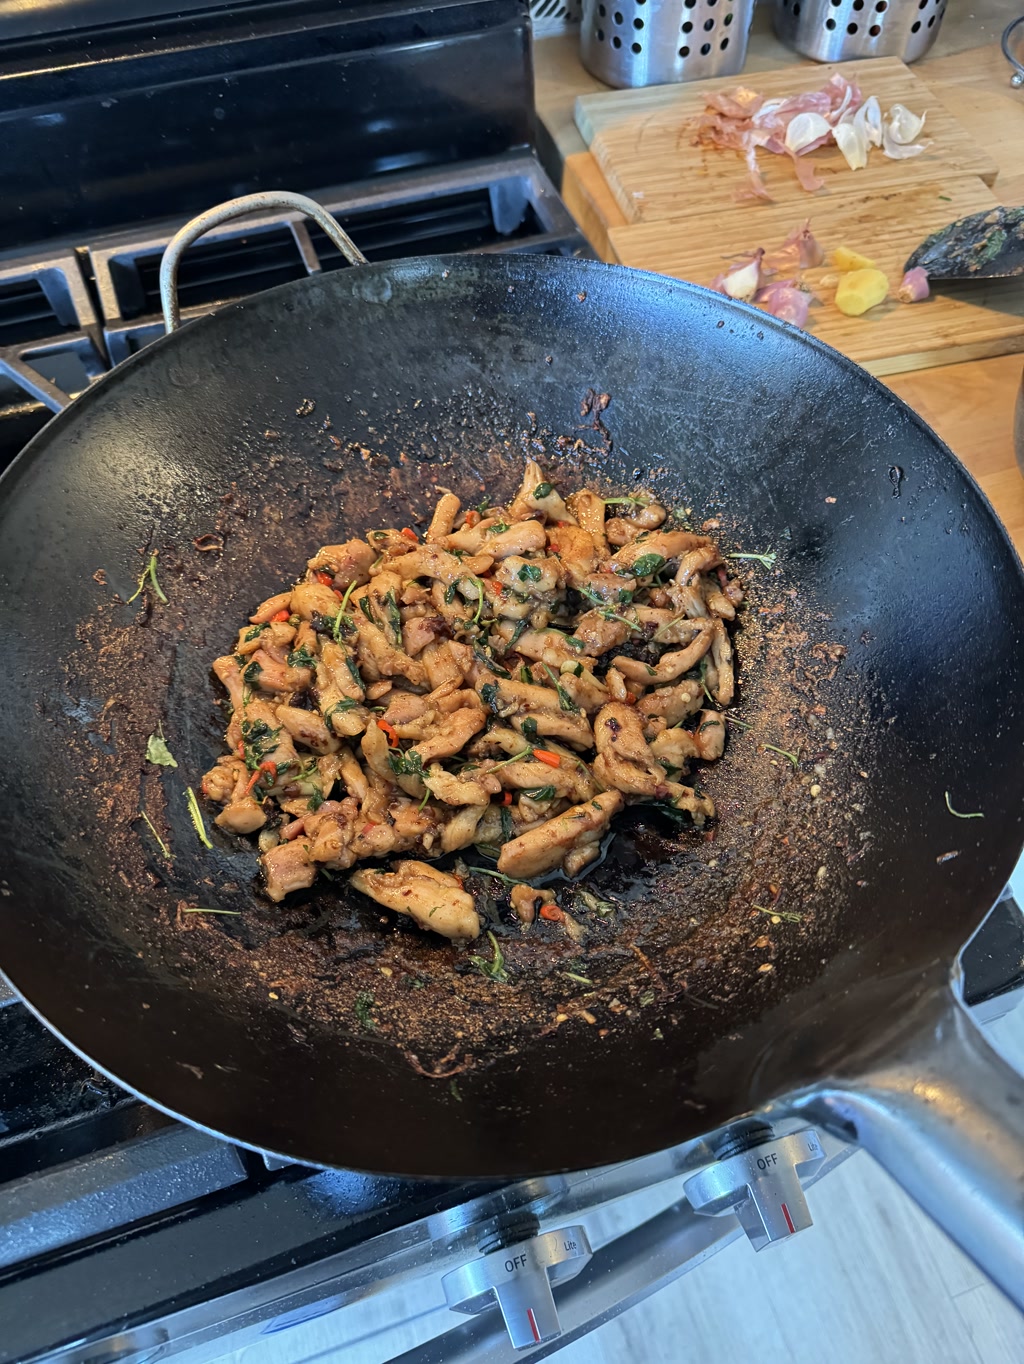 Stir-fried ingredients are in a wok on a gas stove, with visible heat controls at the bottom. The wok contains what appears to be chicken pieces cooked with a variety of herbs and spices, some of which have blackened from the high heat of the wok. The herbs may include green leaves like cilantro or parsley. There is evidence of browning on the sides of the wok, suggesting thorough cooking or sautéing. In the background, there is a wooden cutting board with remnants of chopped red onion and garlic skins indicating prior preparation.